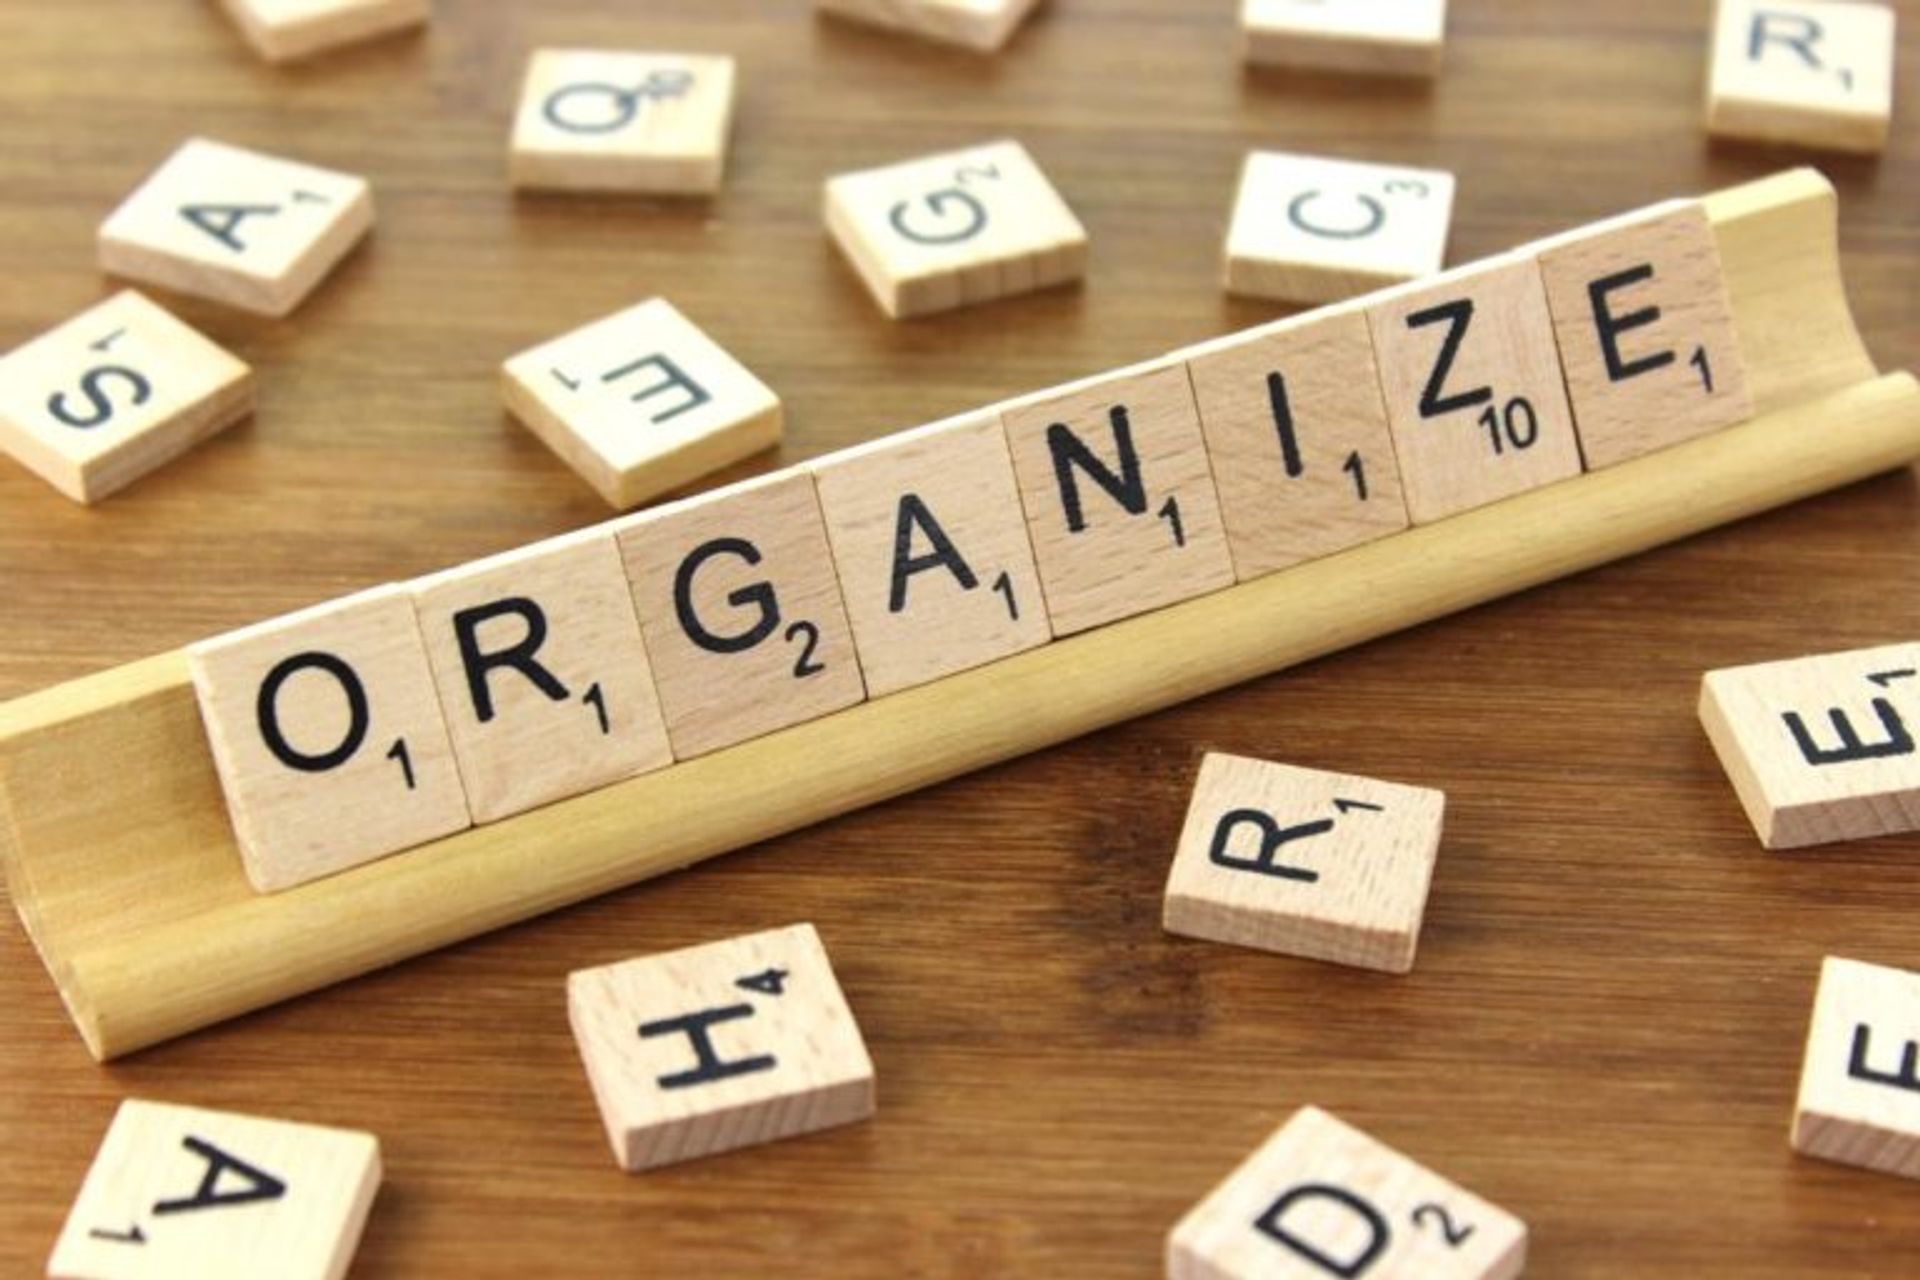 Scrabble letters spelling out 'Organize'.